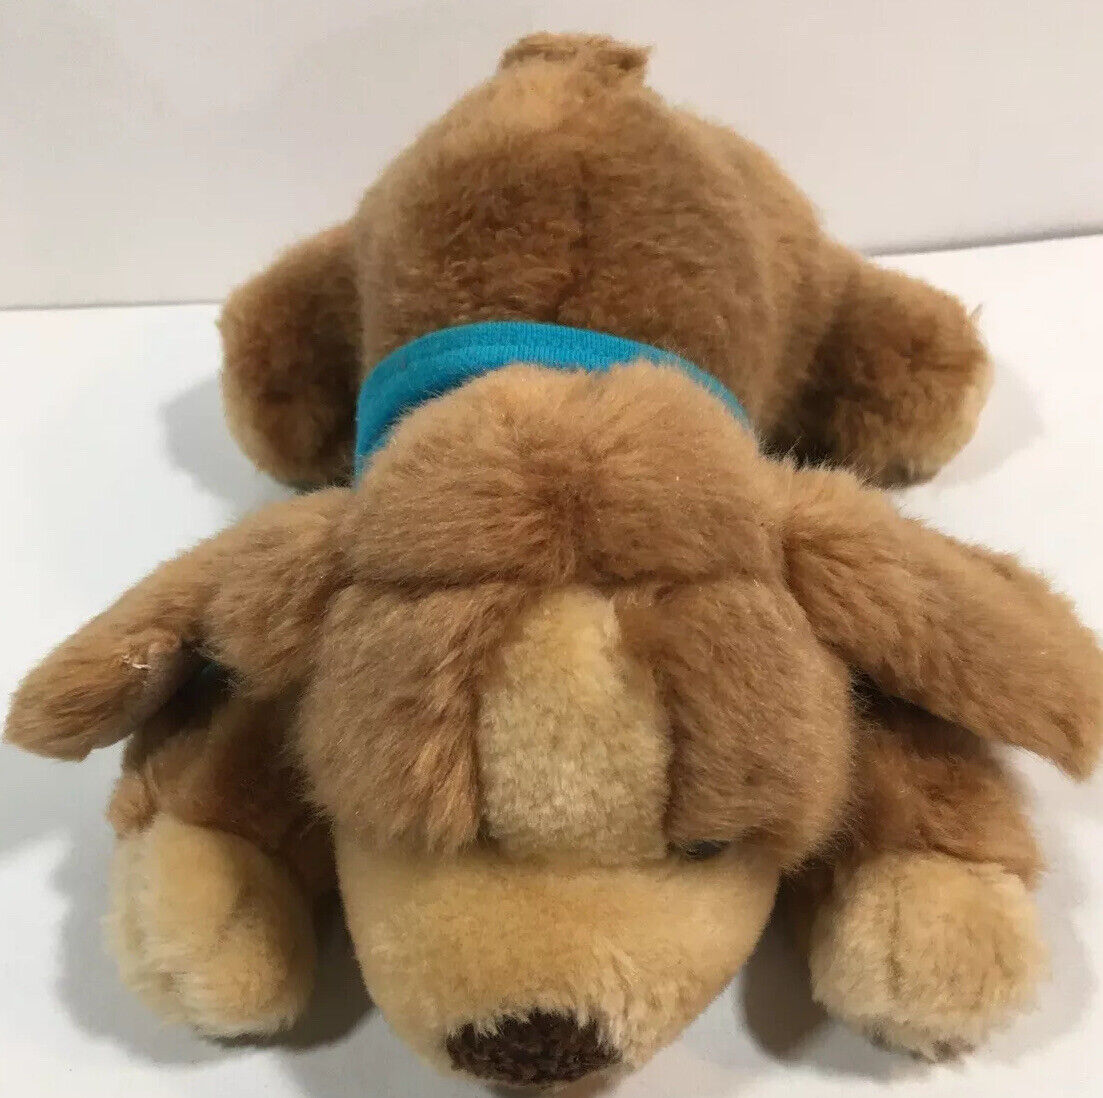 Animal Alley Dog Brown Puppy In Blue Shirt 12" Plush Toys R Us